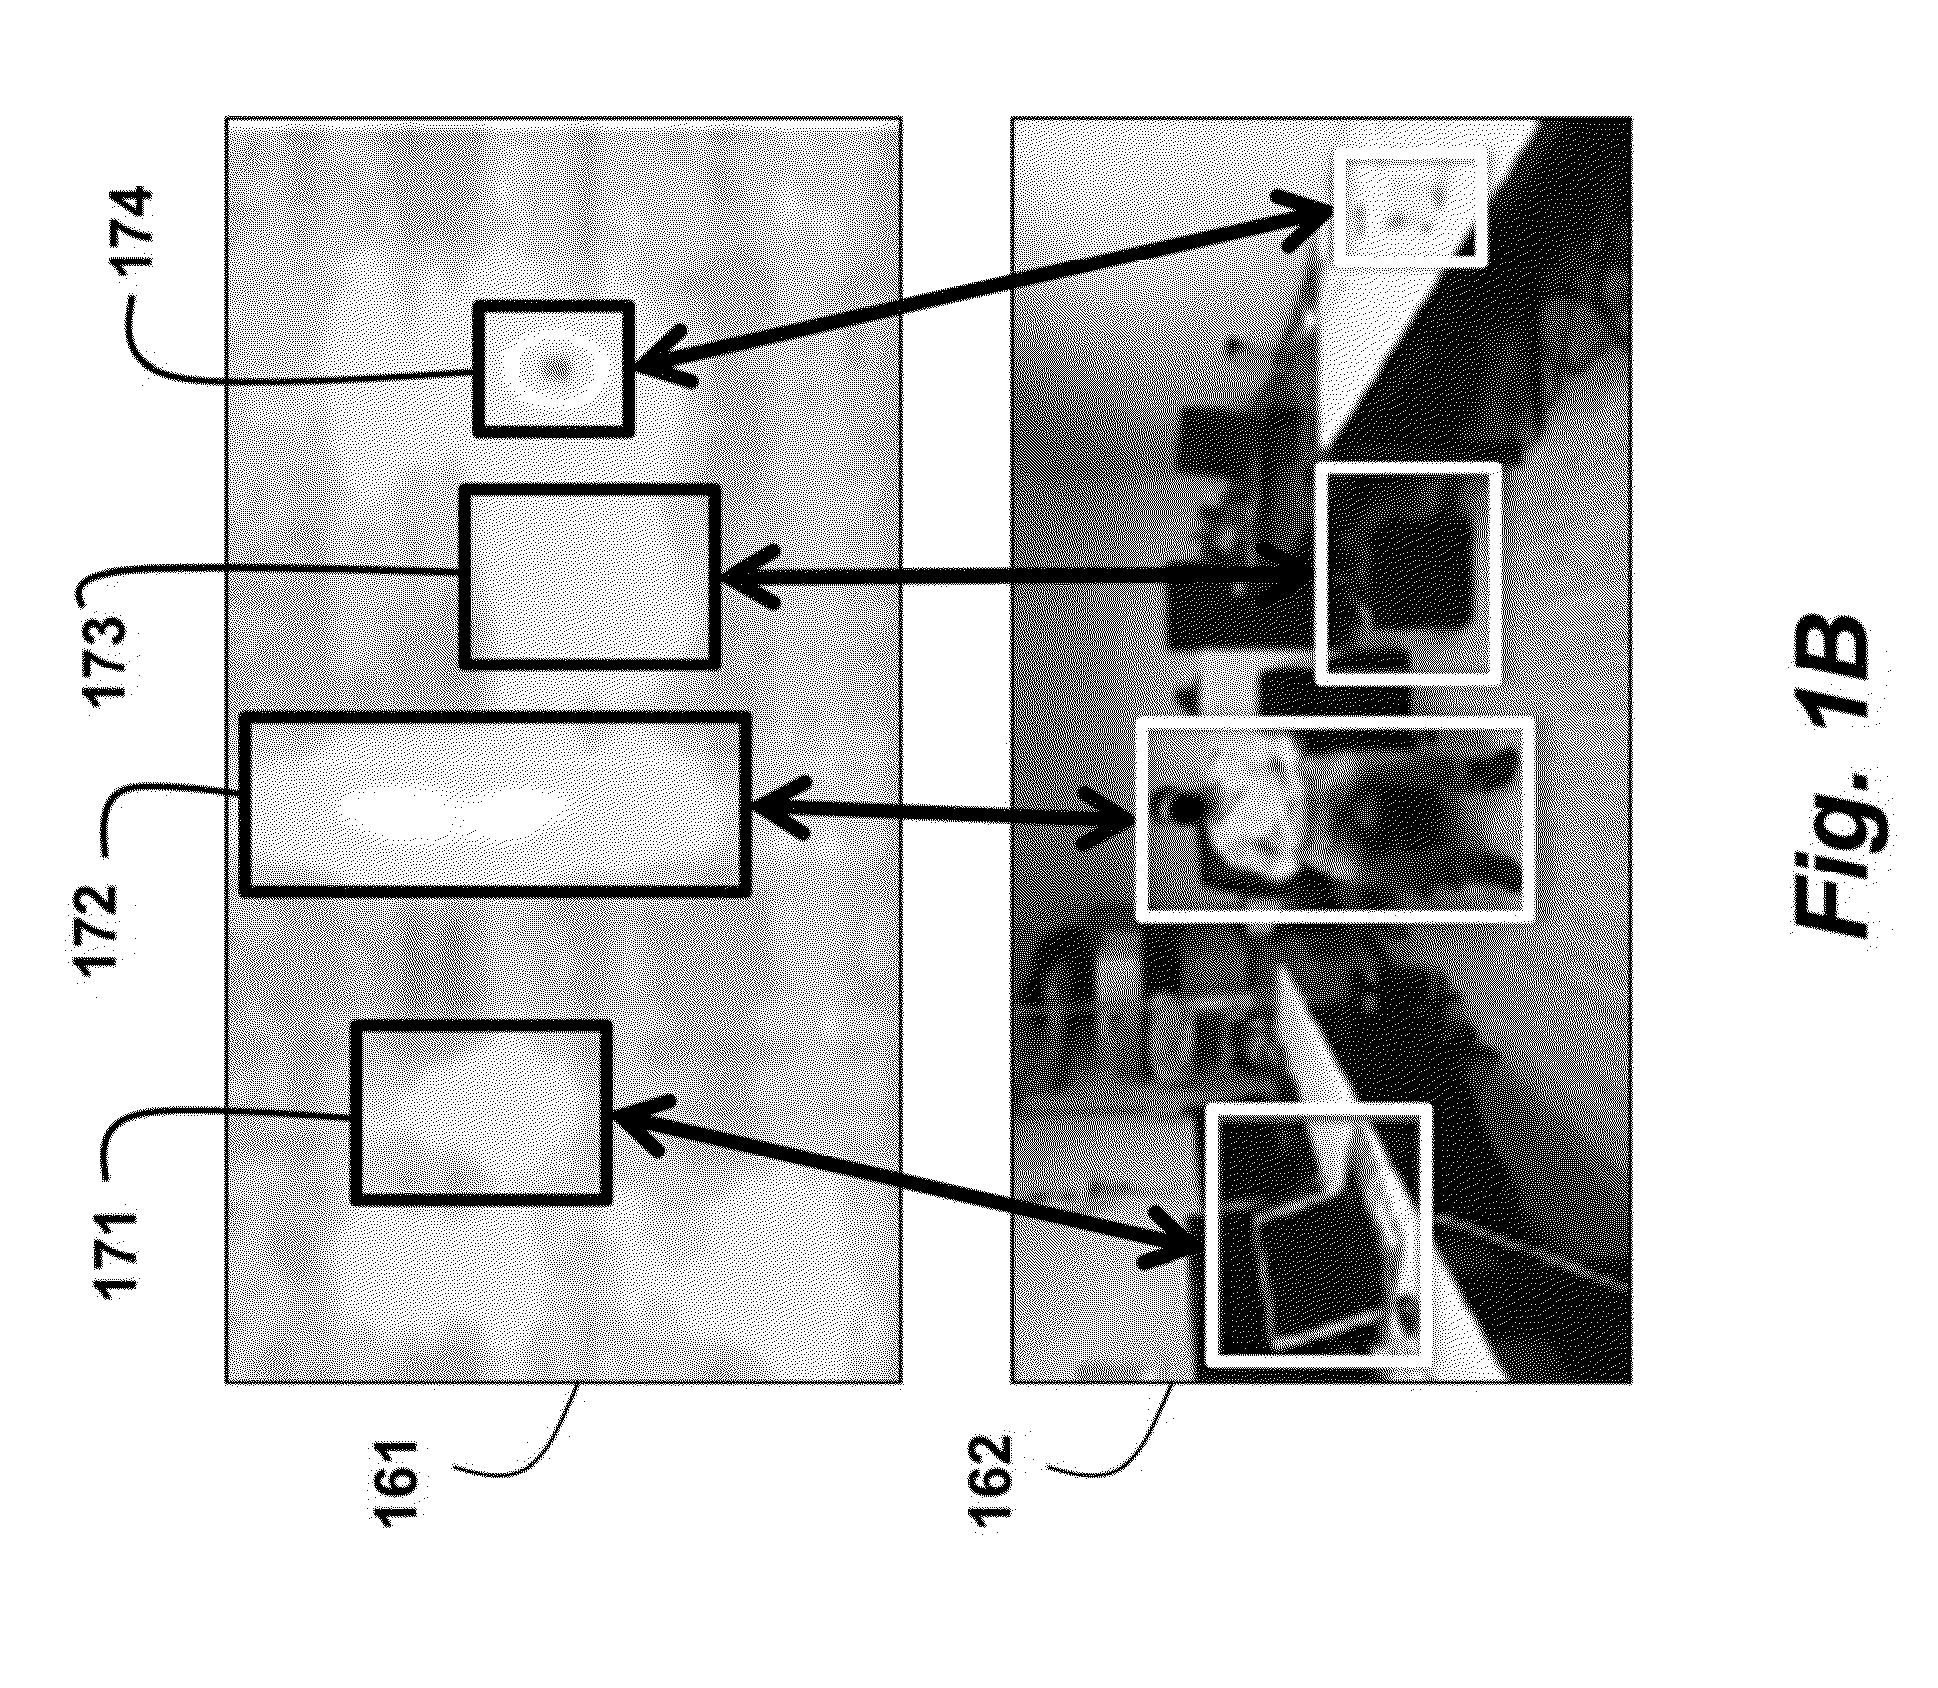 Method and System for Tracking People in Indoor Environments using a Visible Light Camera and a Low-Frame-Rate Infrared Sensor